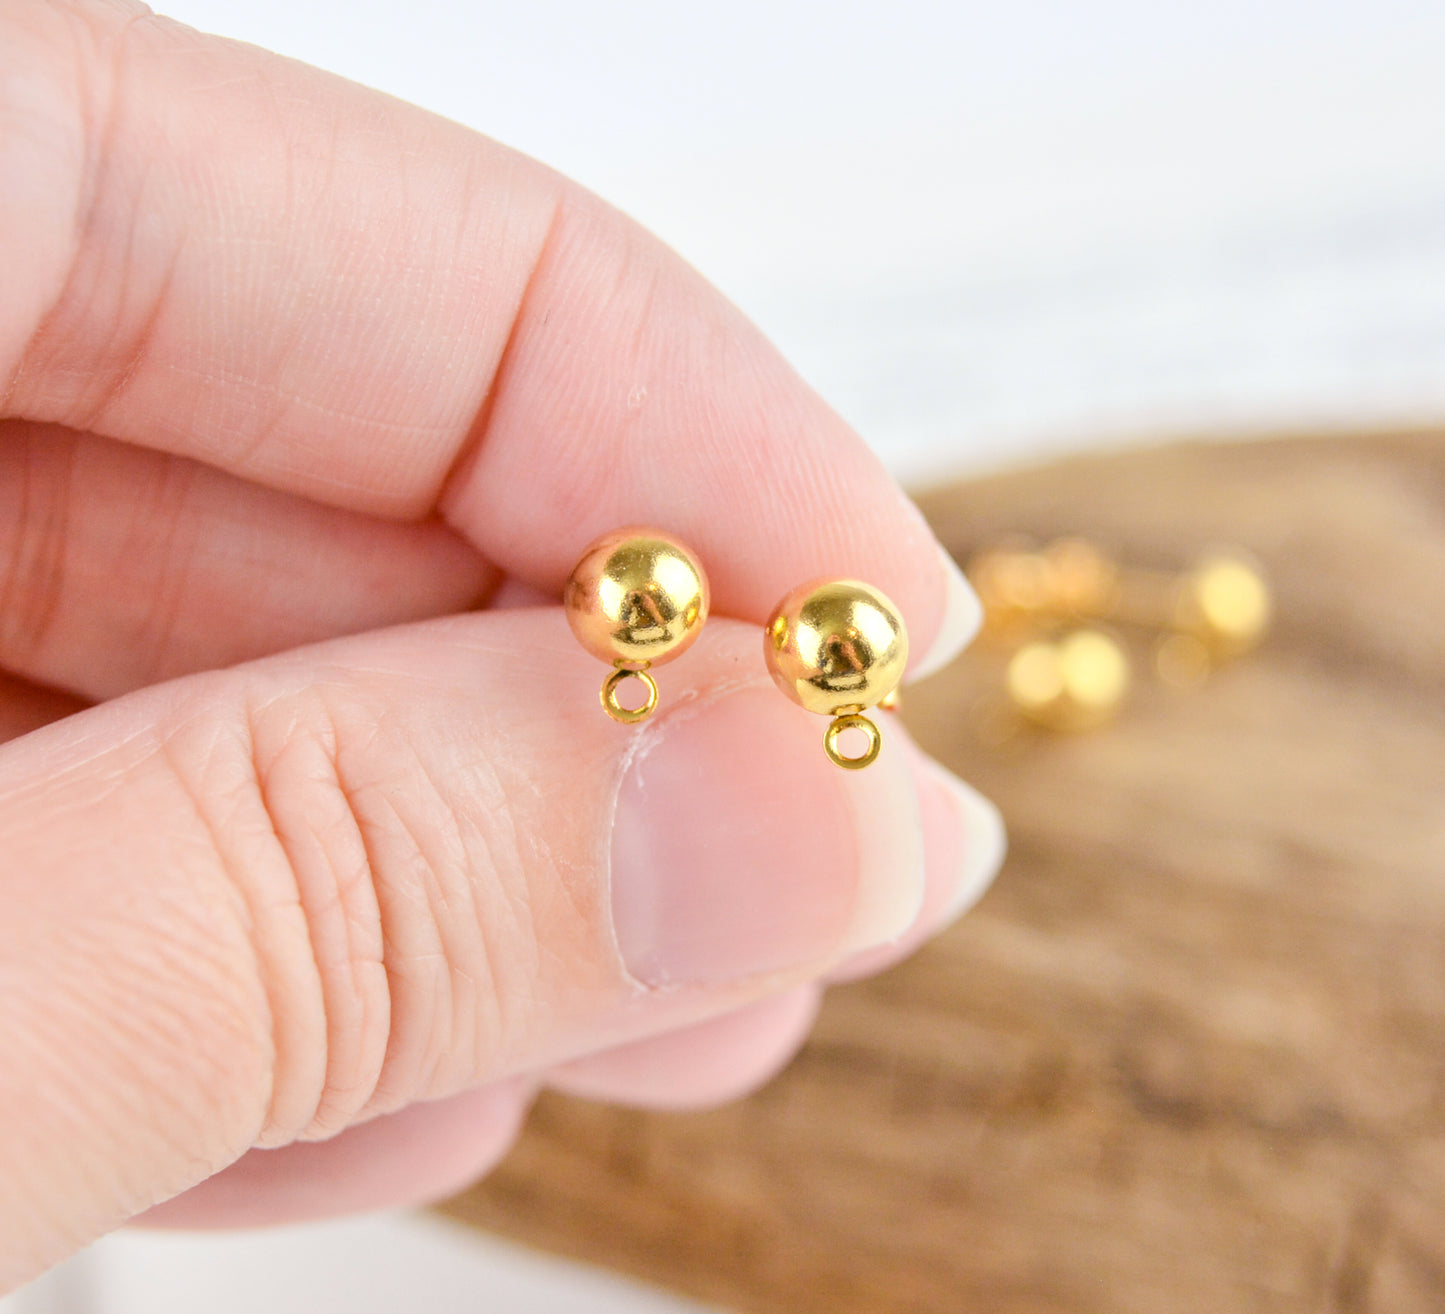 6mm Domed Earrings with Closed Loop, Choose Silver, Gold, Gunmetal, or Antiqued Gold Plated Brass